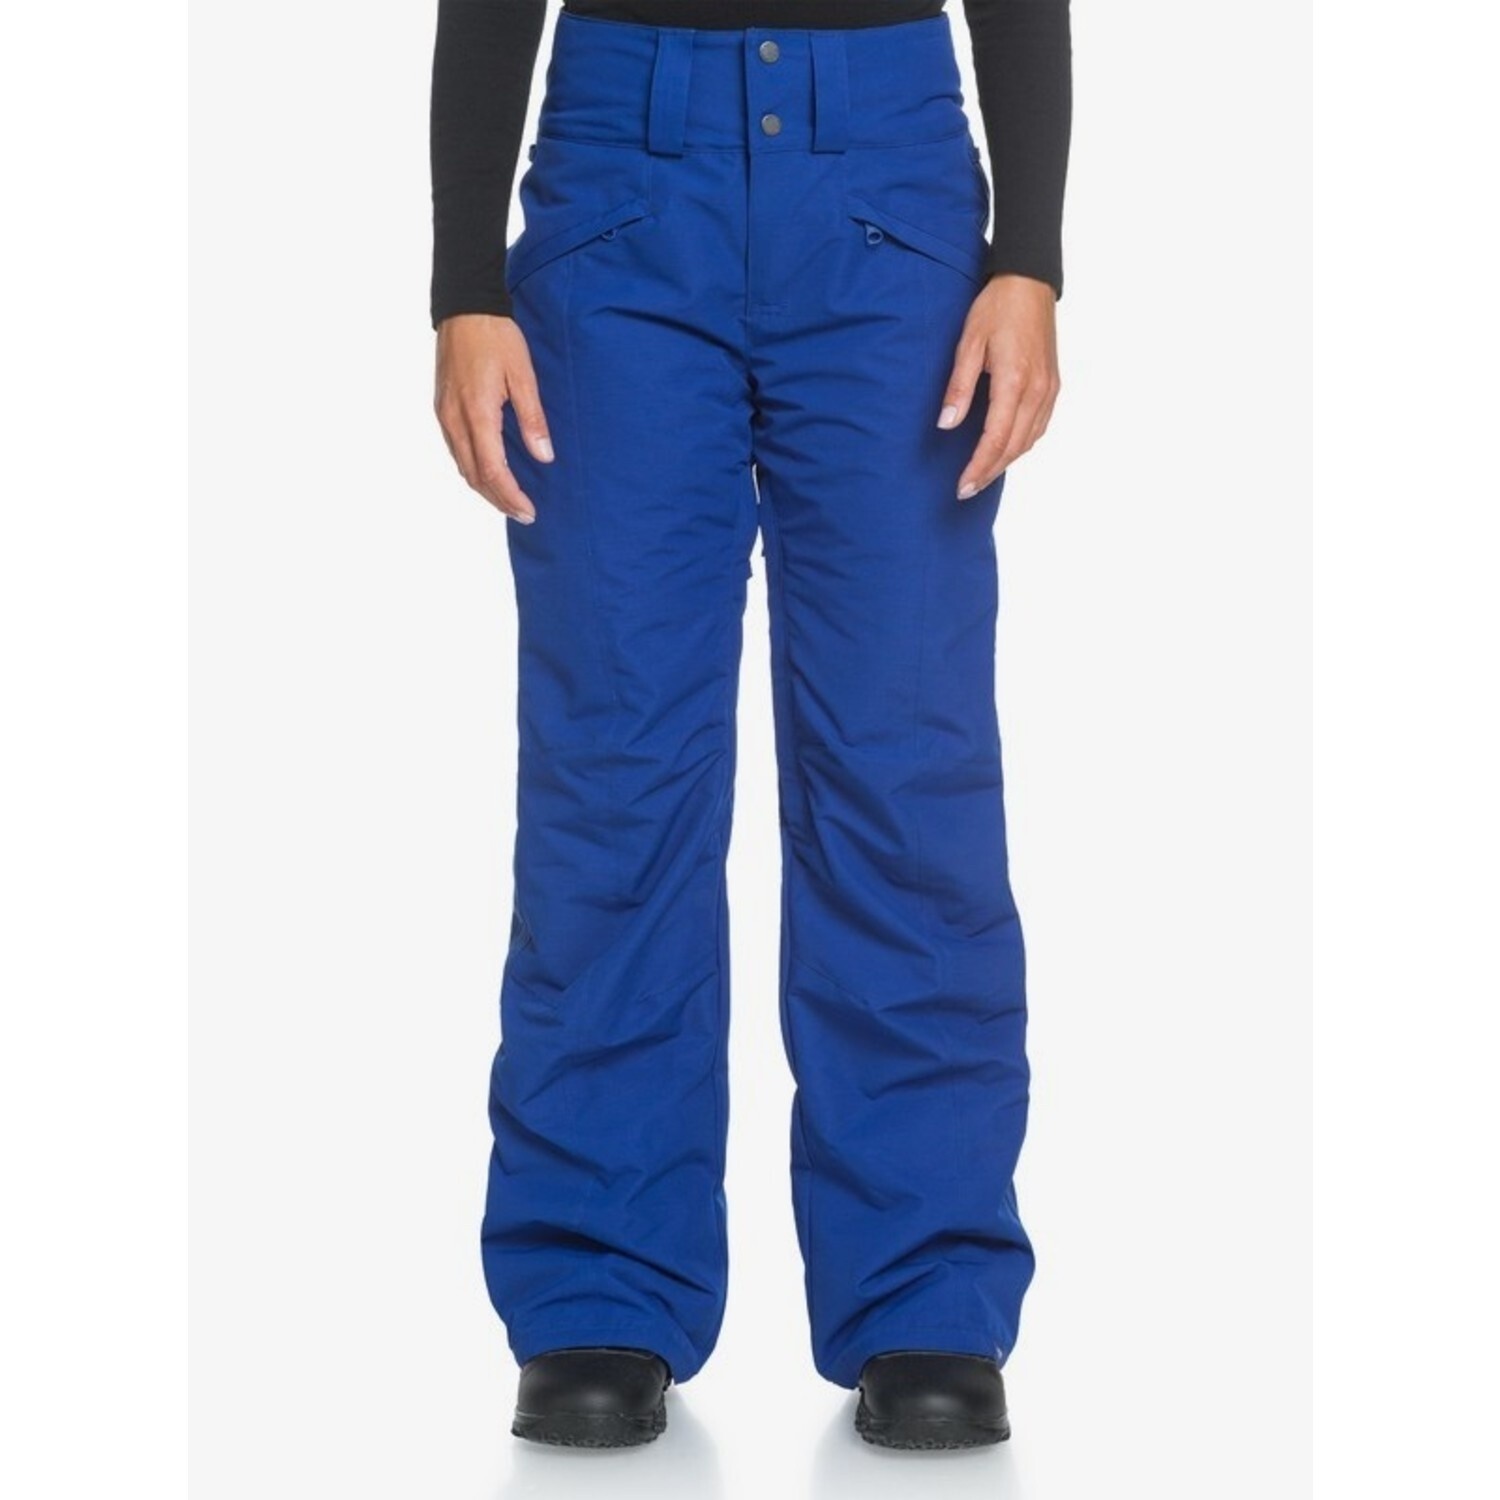 Roxy Spiral Snow Pant: Blue - Medicine Hat-The Boarding House